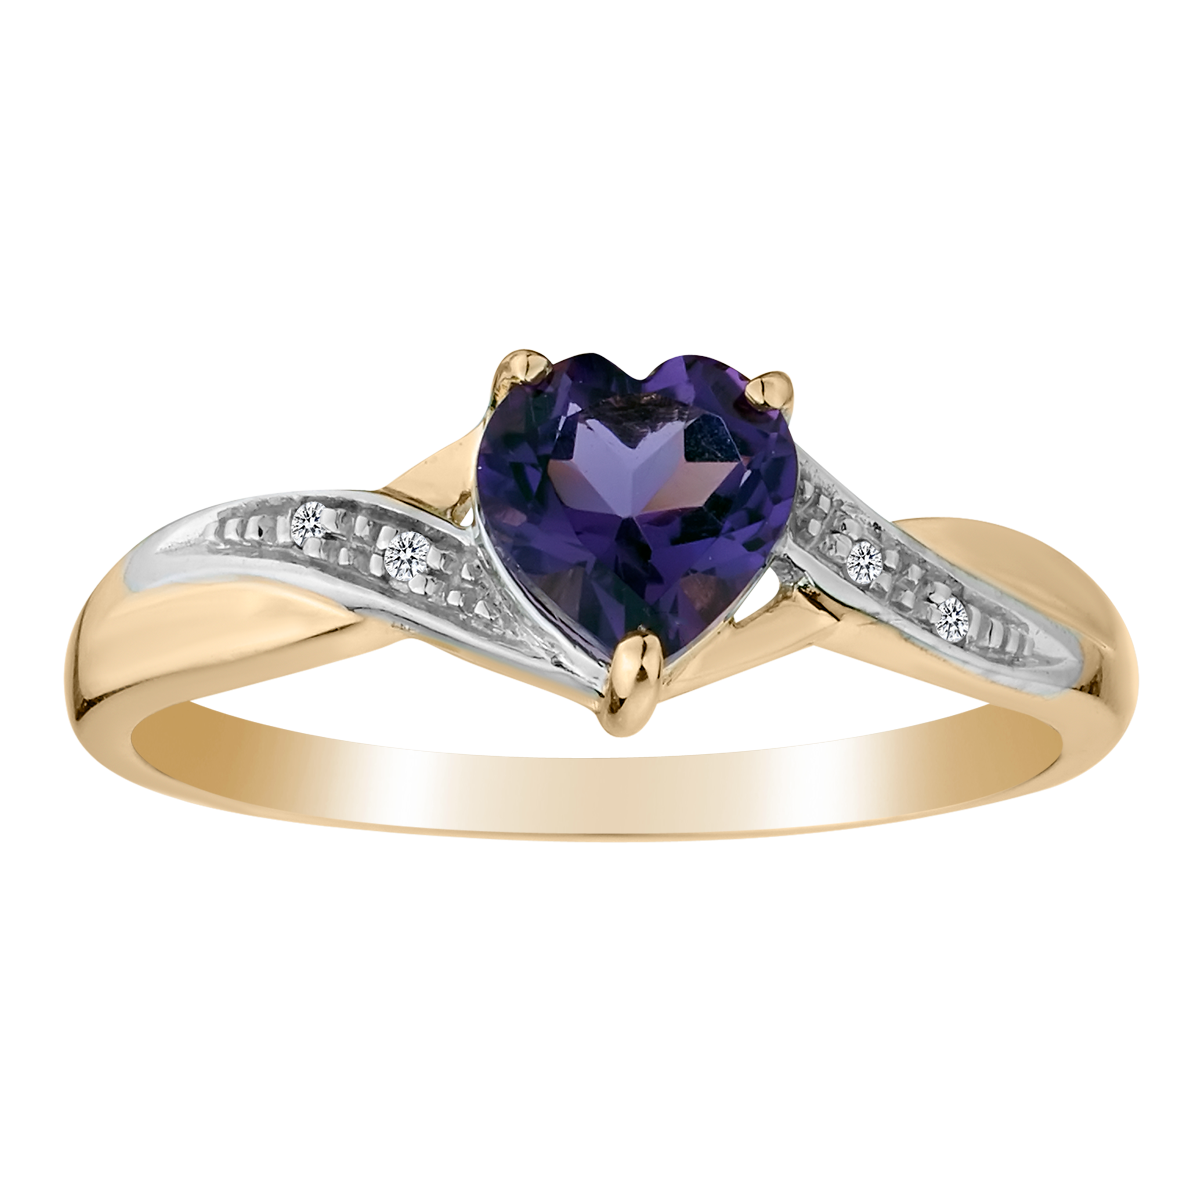 Genuine Amethyst and Diamond Ring,  10kt Yellow Gold.  Gemstone Rings. Griffin Jewellery Designs